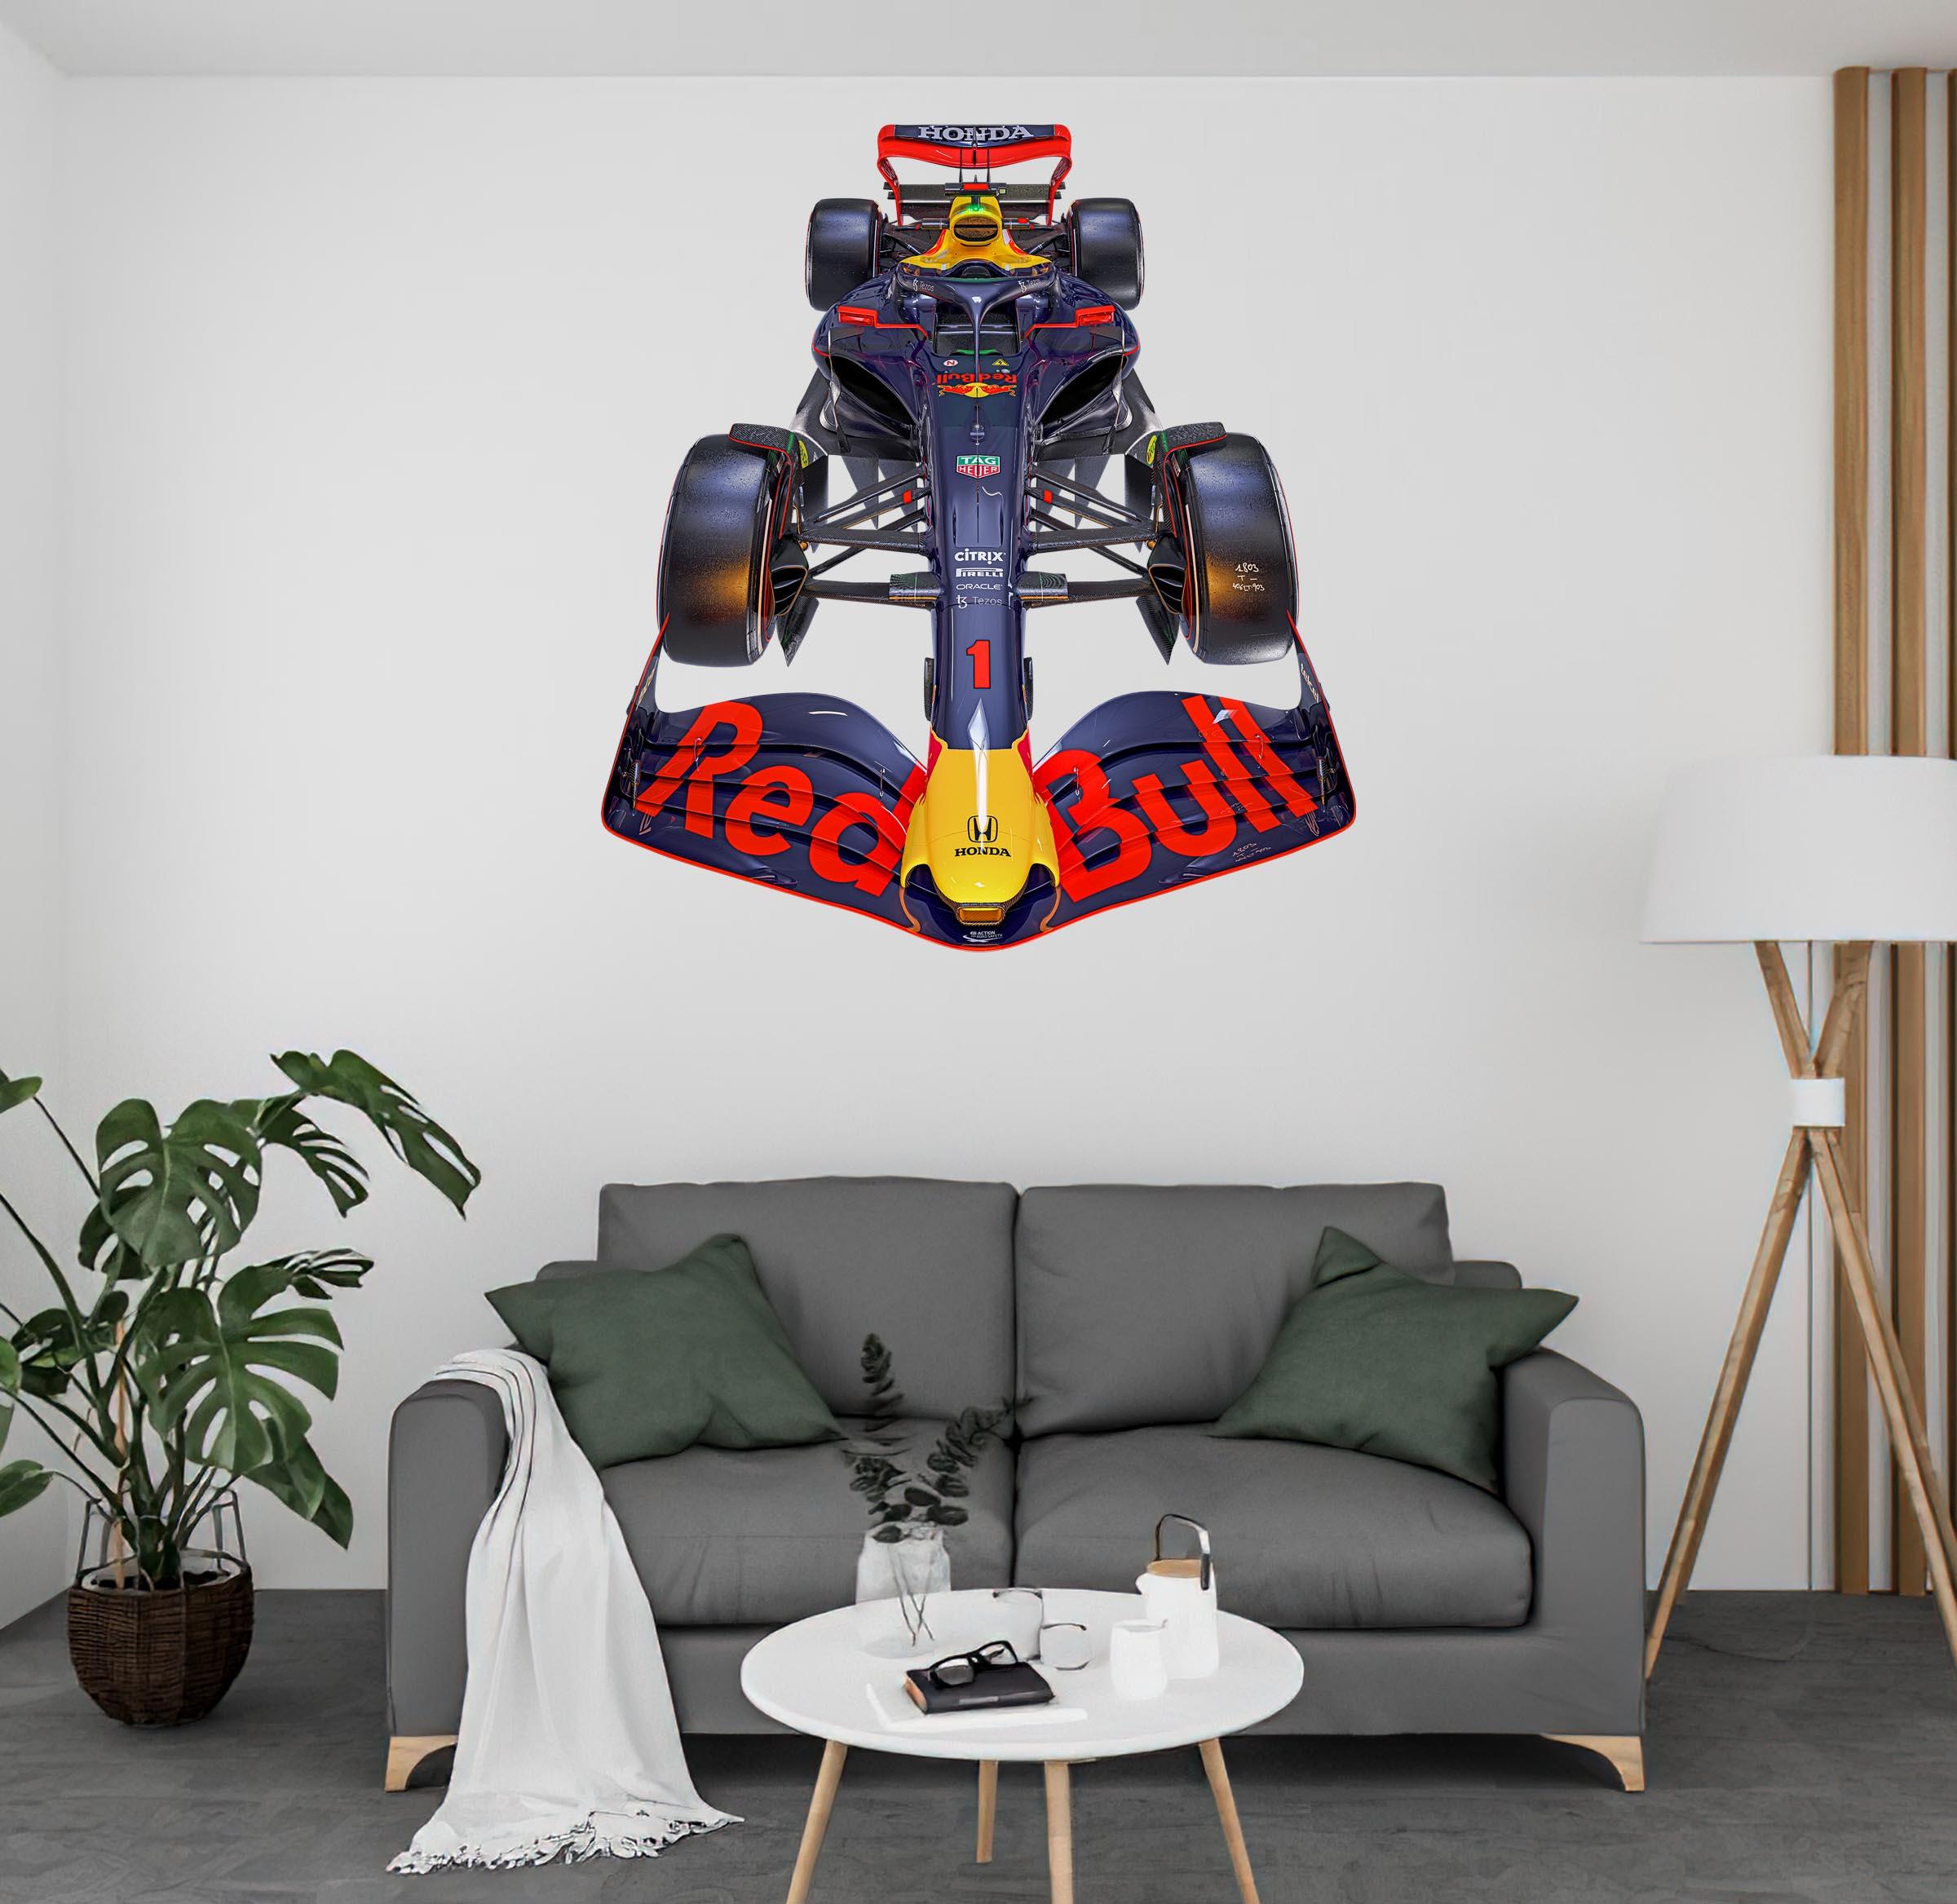 RB18 2022 F1 Red Bull Wall Front Decal Sticker Max Verstappen Car 019, wall sticker